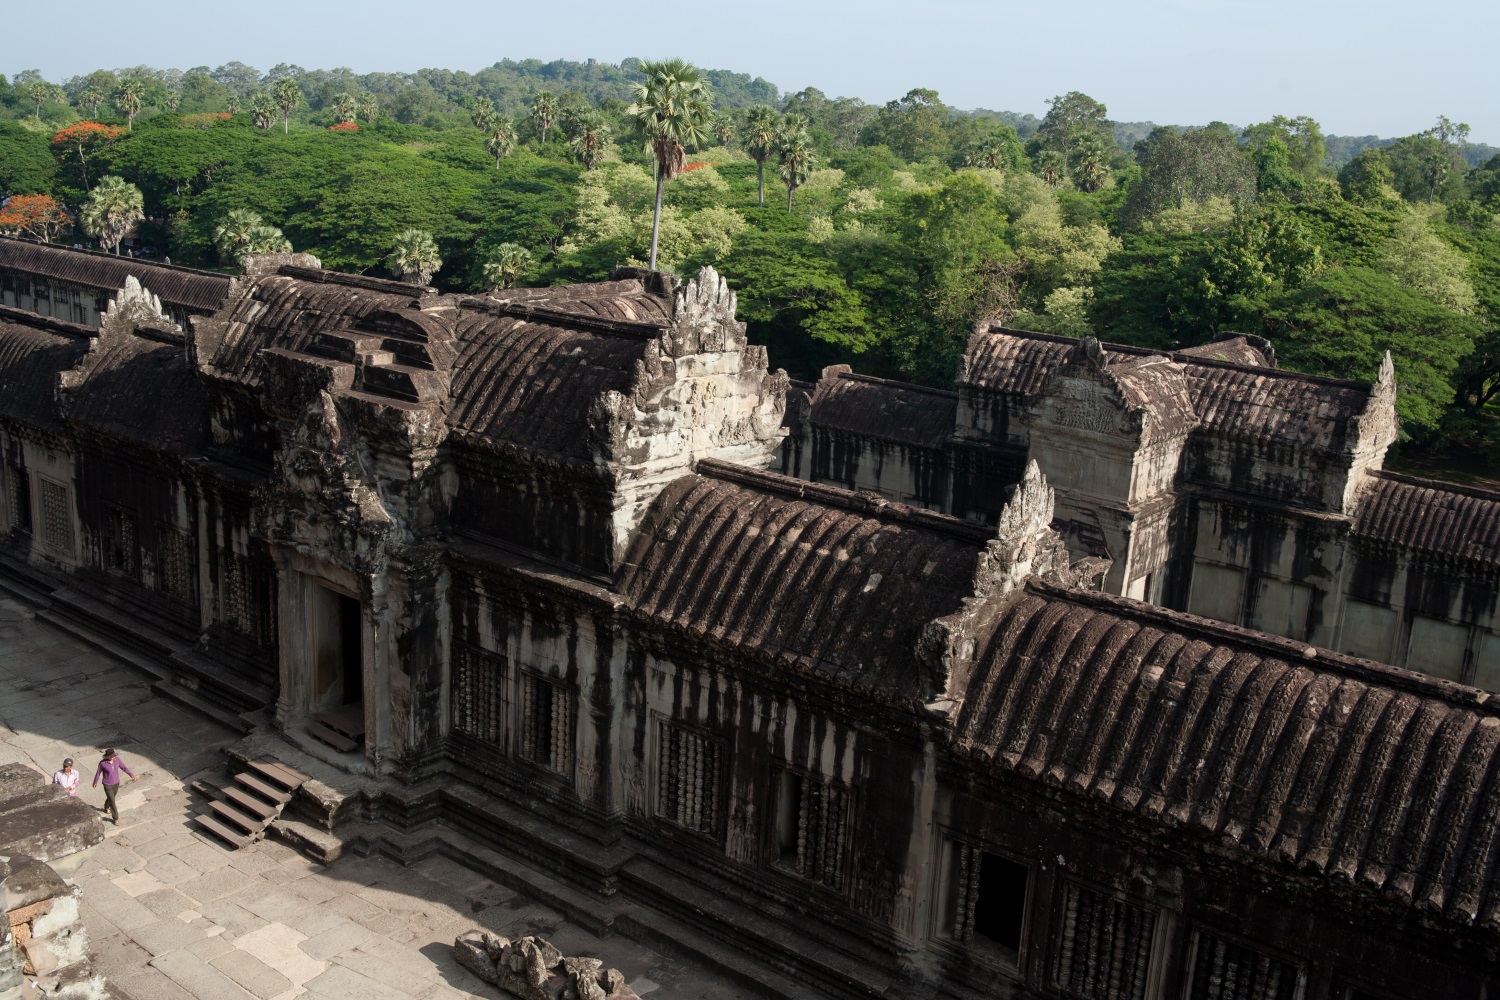 A section of the outer wall at Angkor Wat